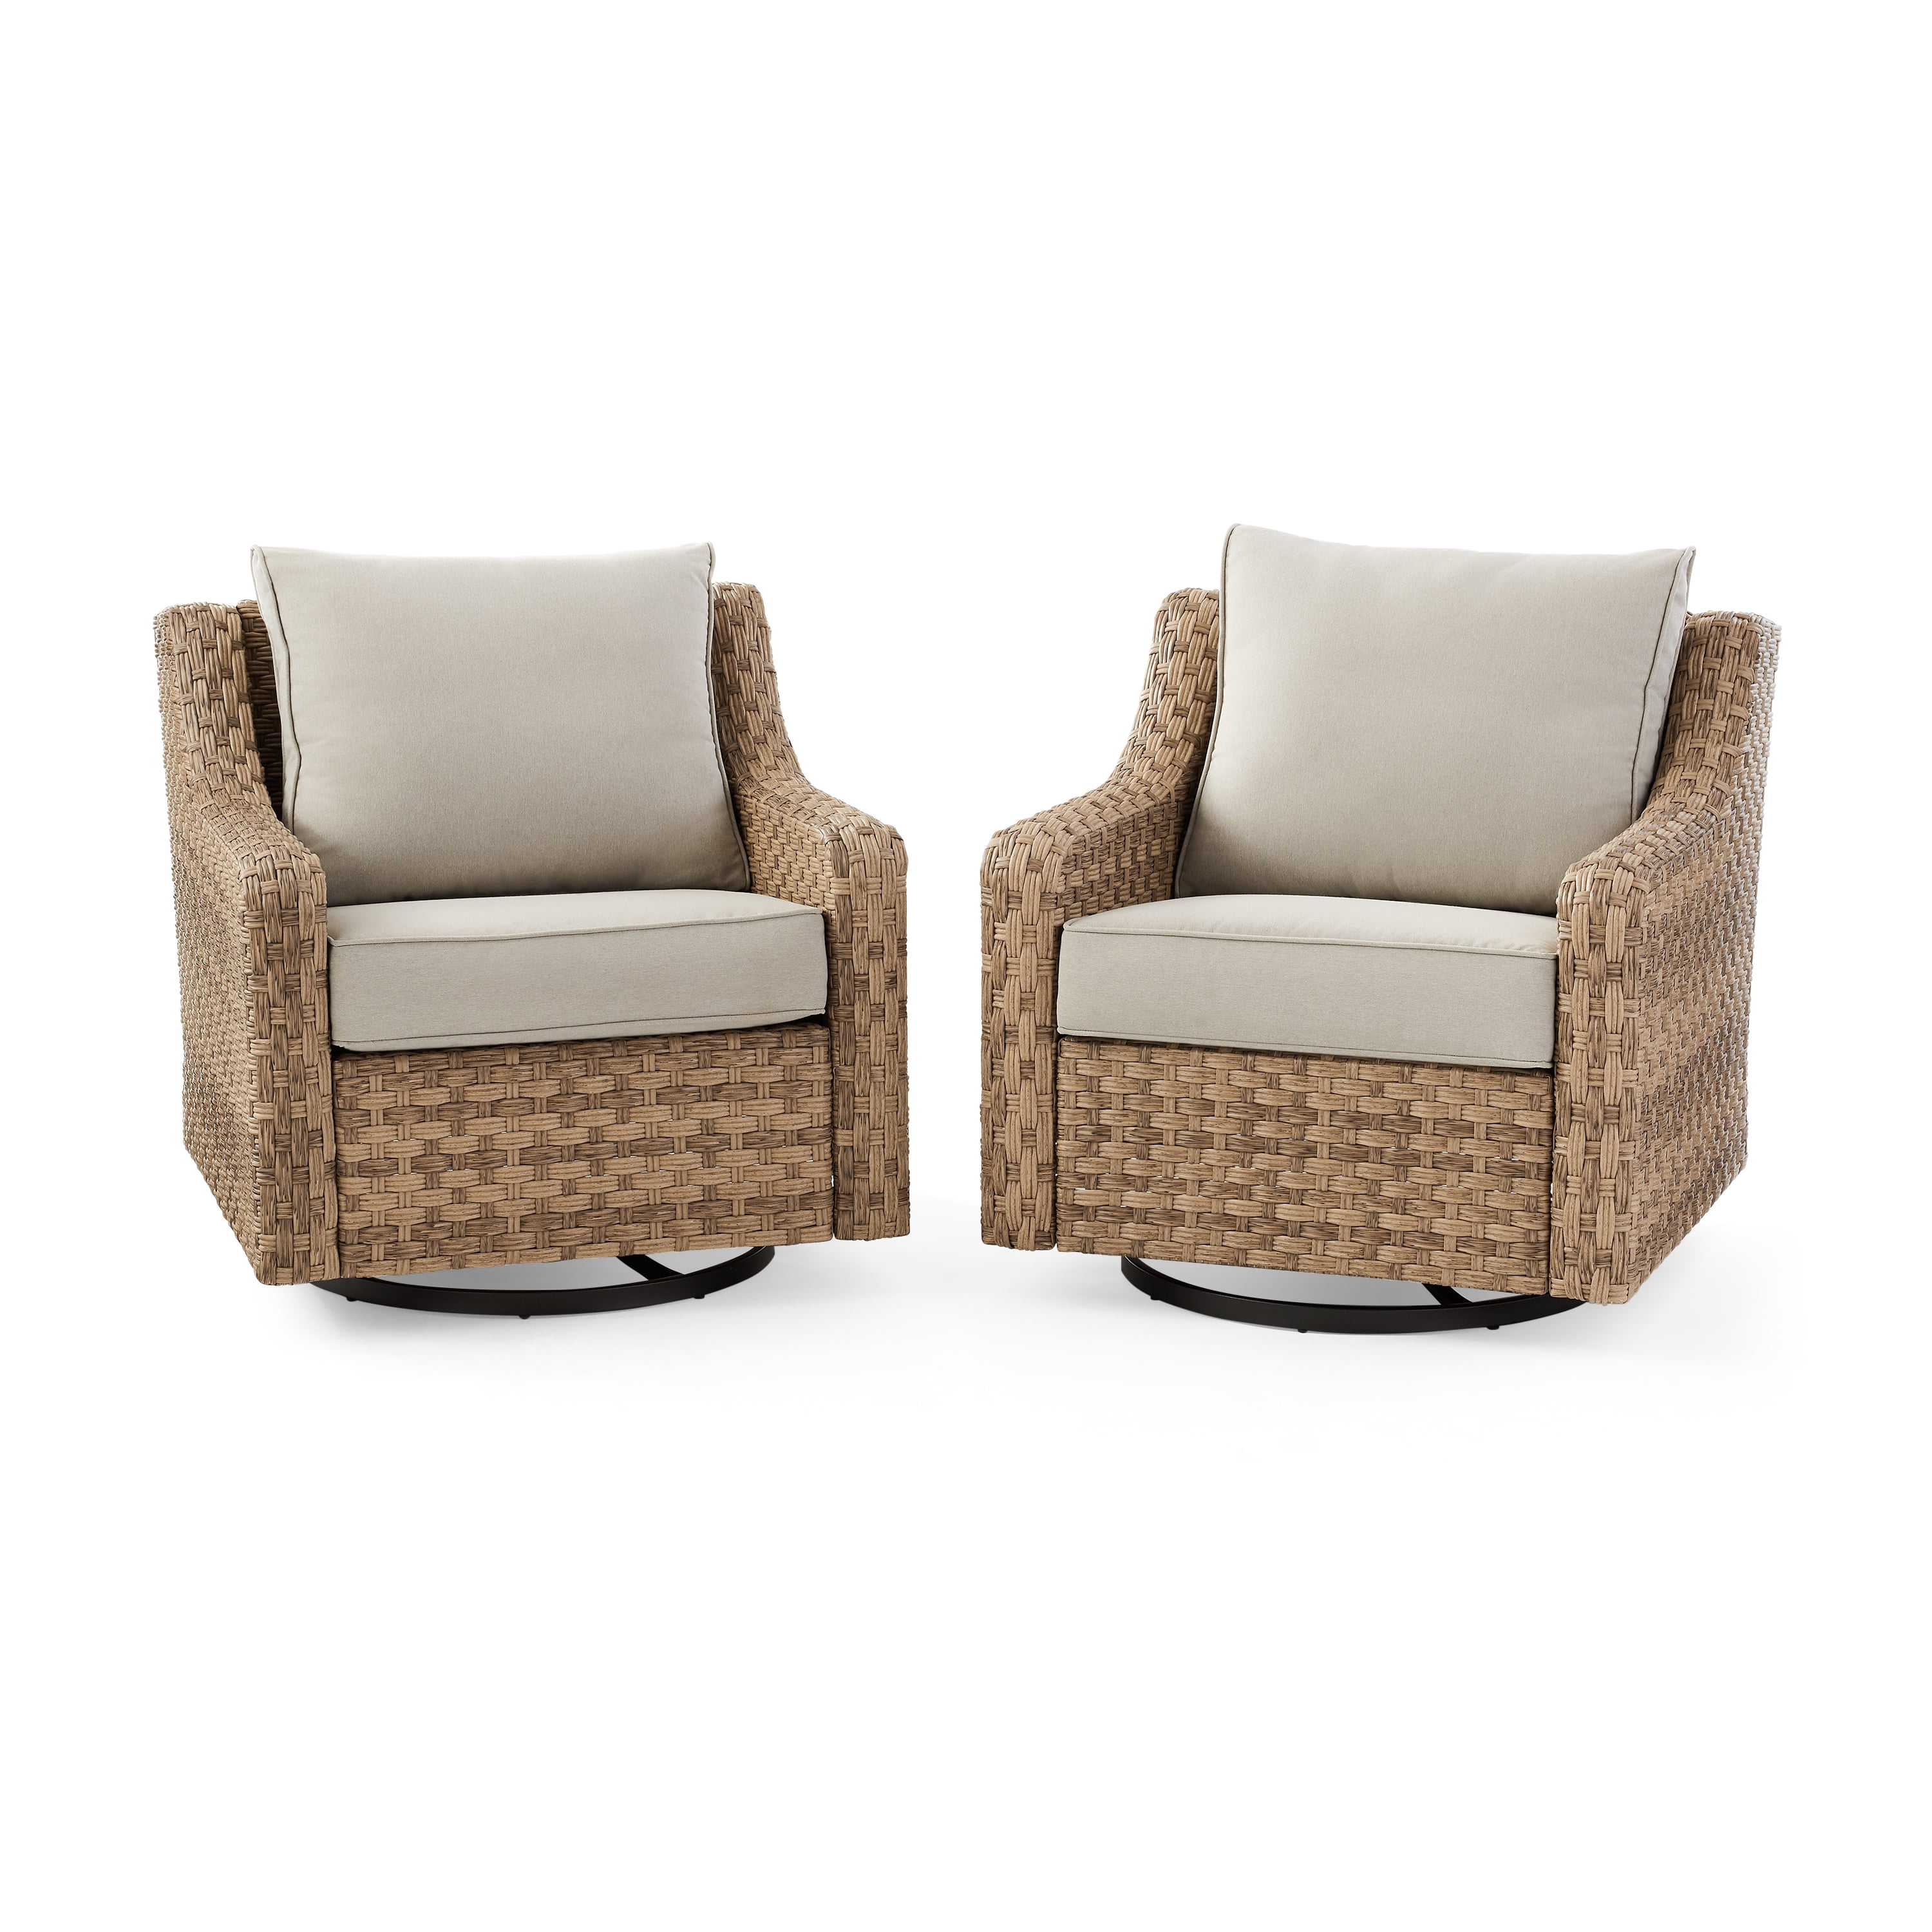 Better Homes & Gardens River Oaks 2 Piece Swivel Glider with Patio ...